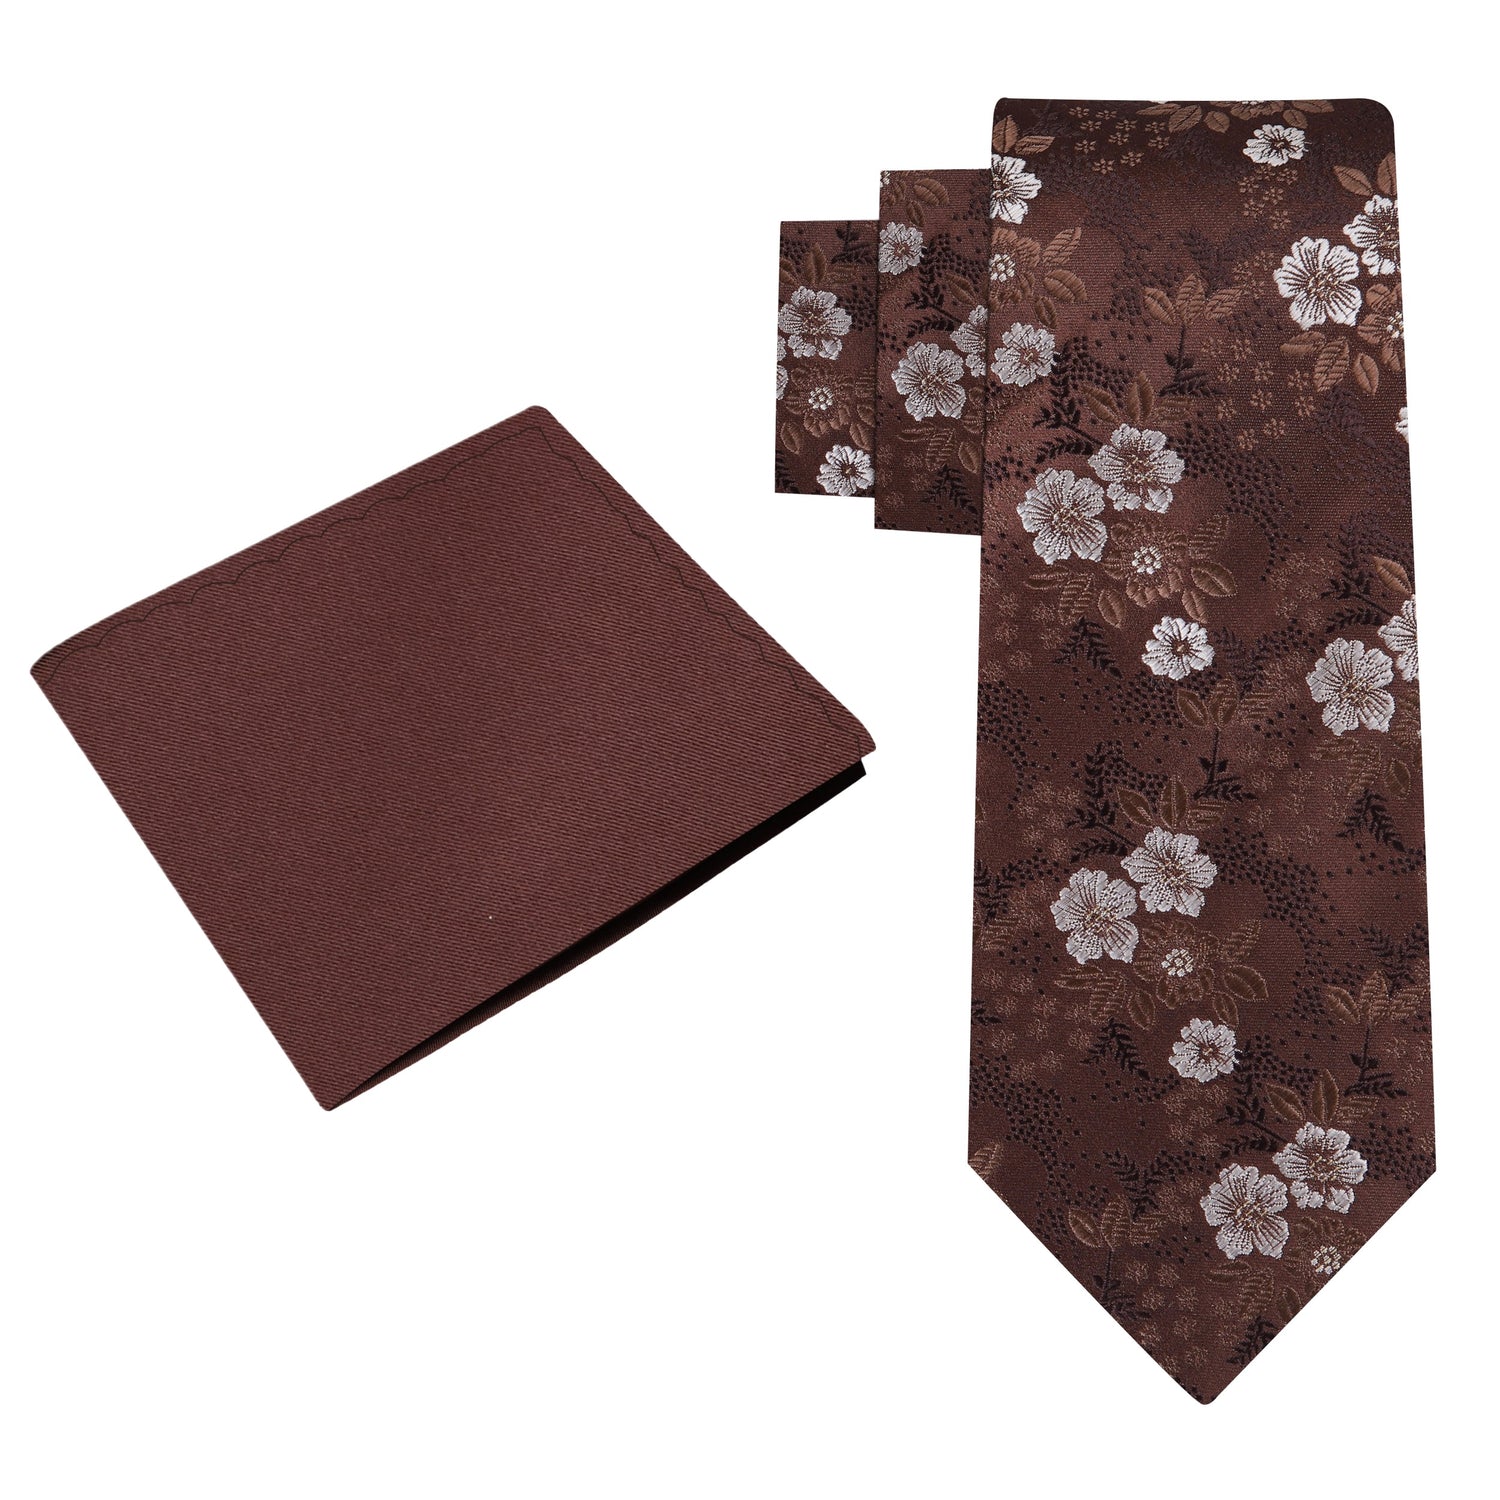 View 2: Shades of Brown Floral Tie and Solid Brown Square